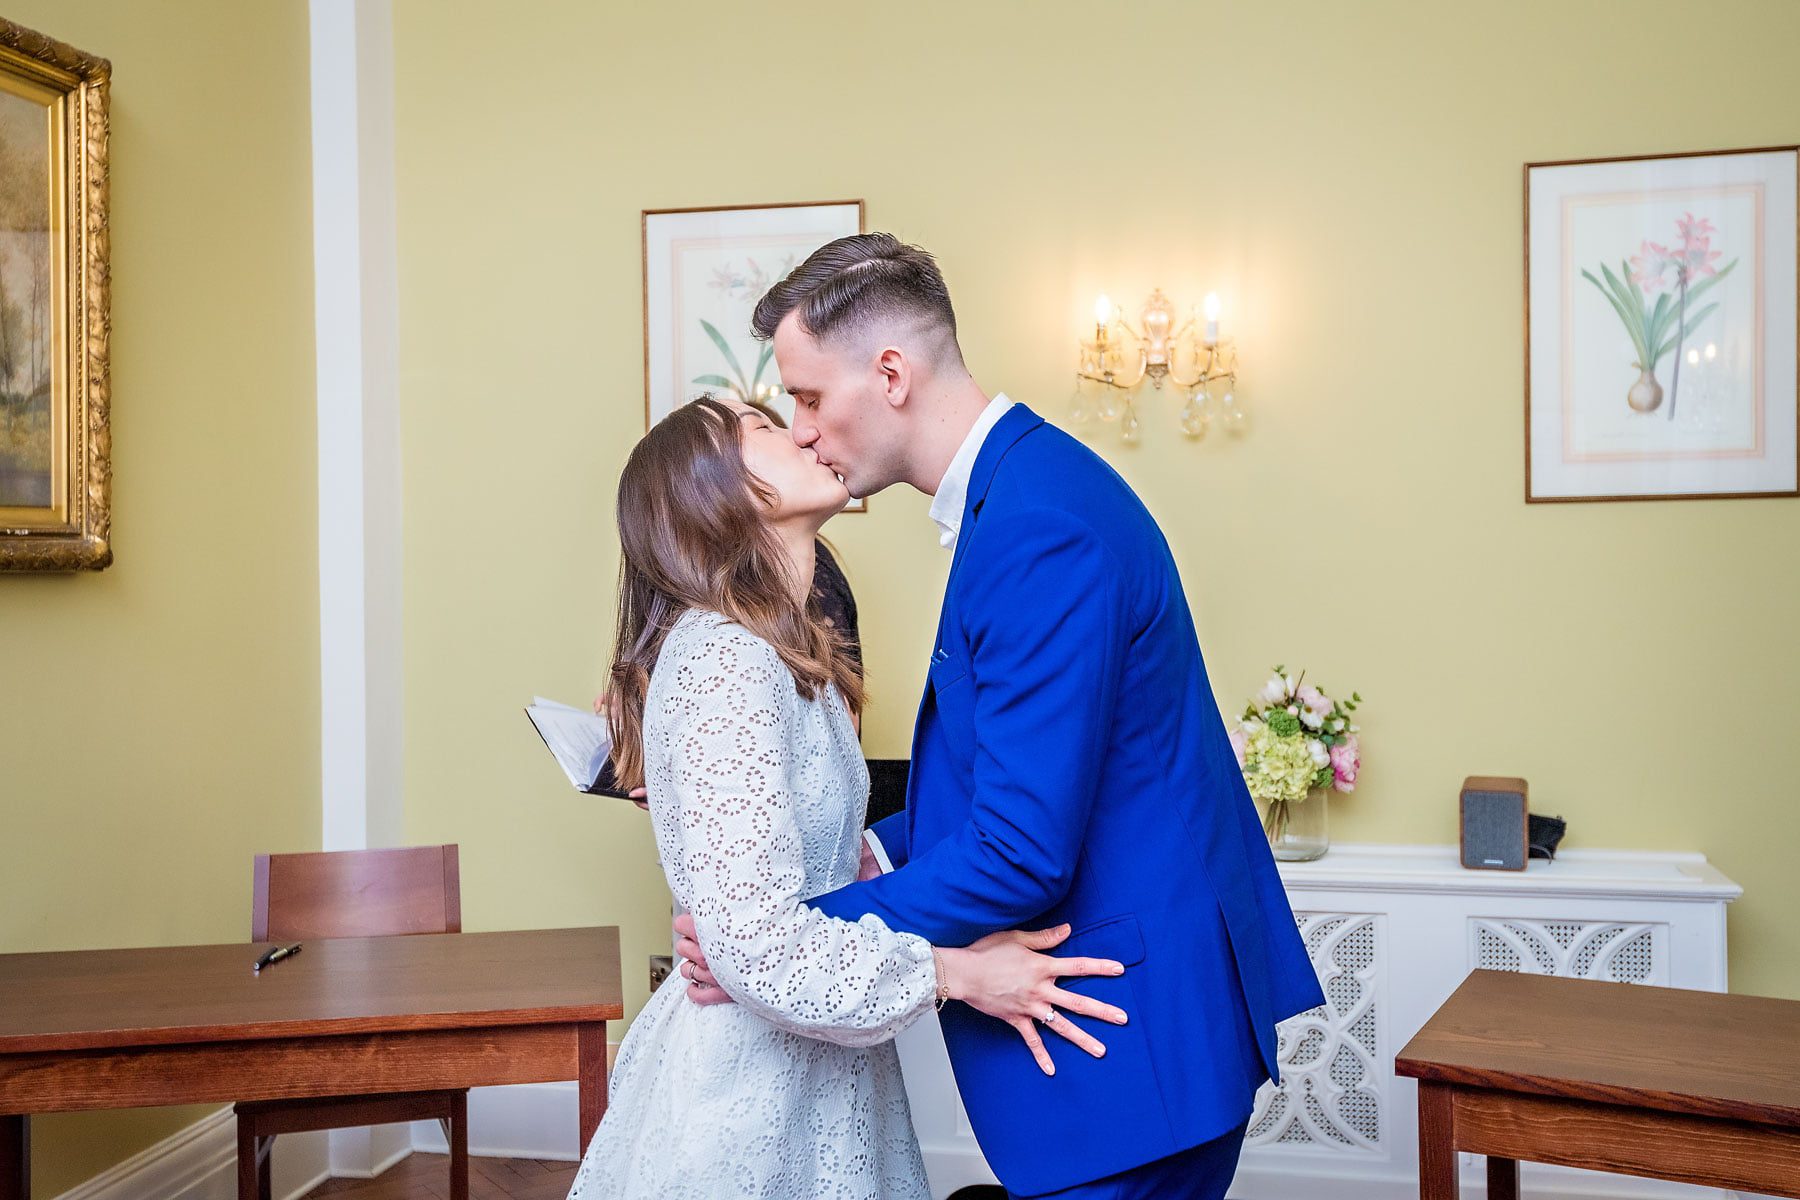 Couple having their first kiss in the Rossetti Room at Chelsea Old Town Hall